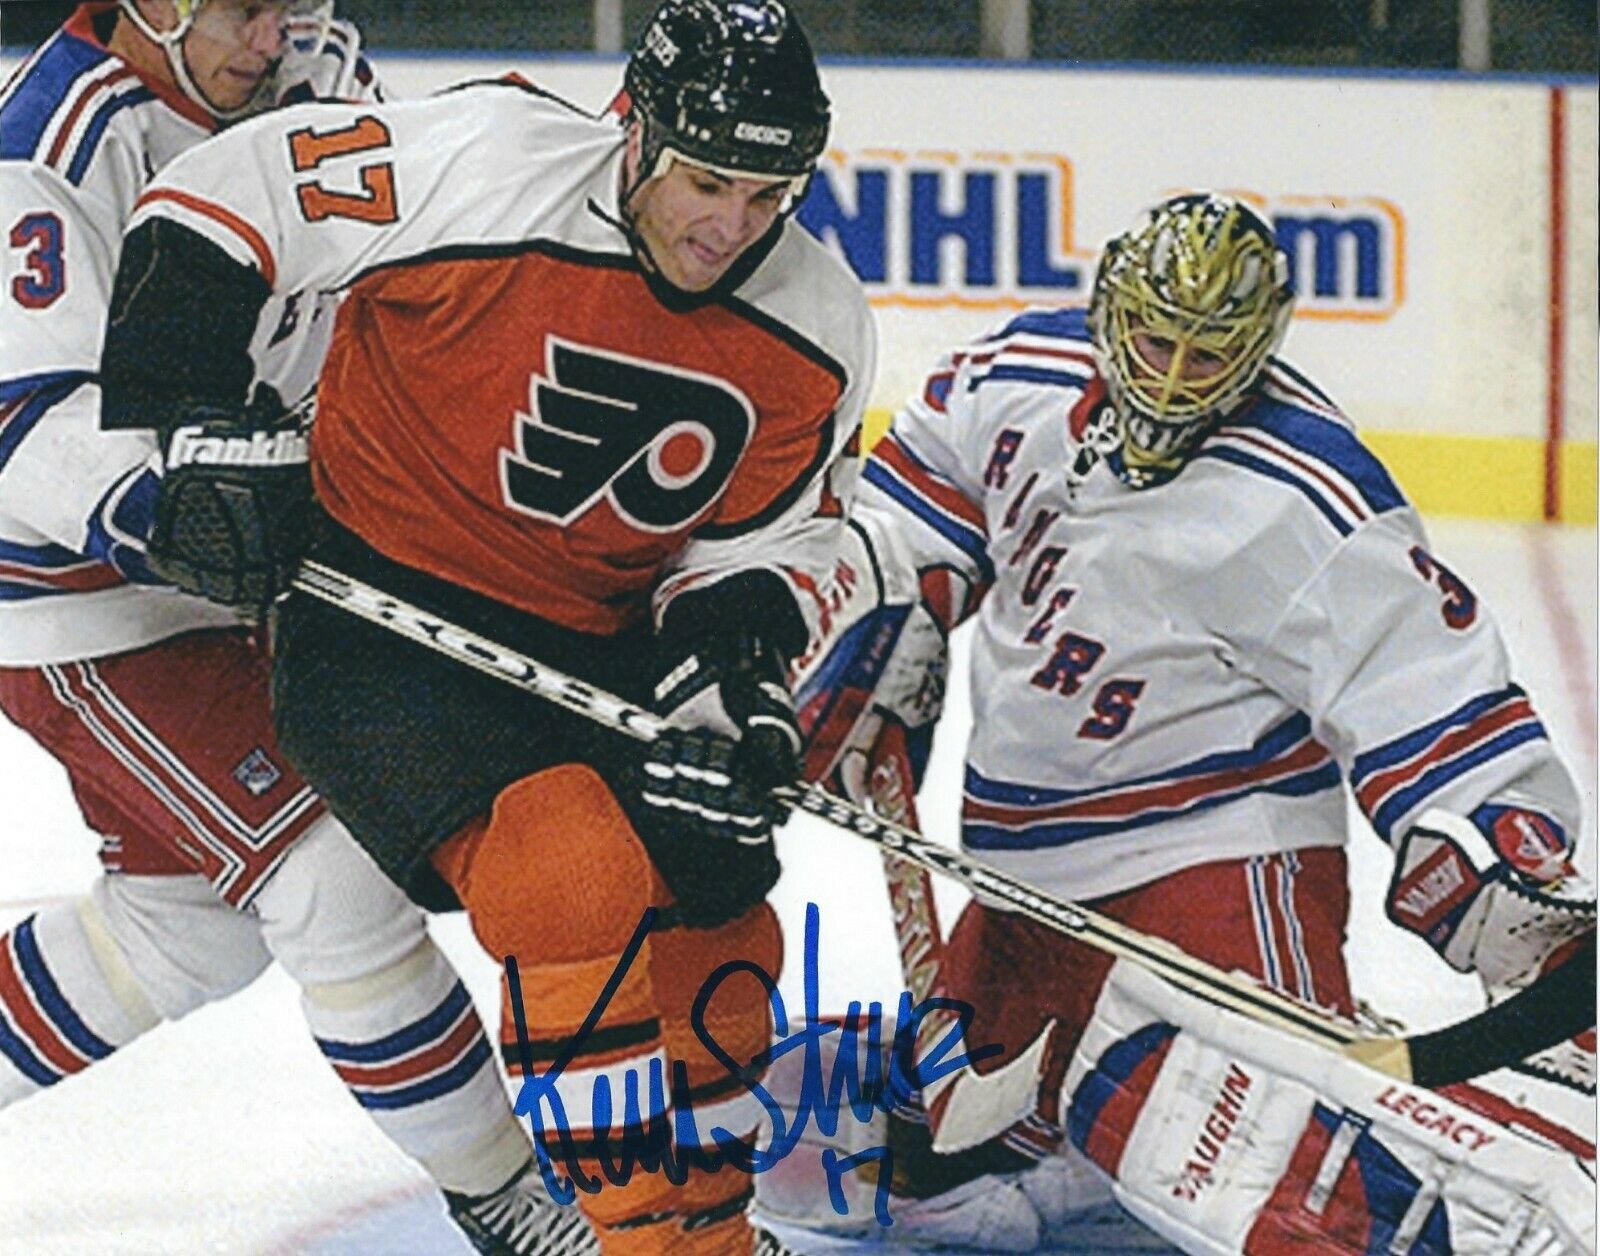 Autographed 8x10 KEVIN STEVENS Philadelphia Flyers Photo Poster painting w/Show Ticket